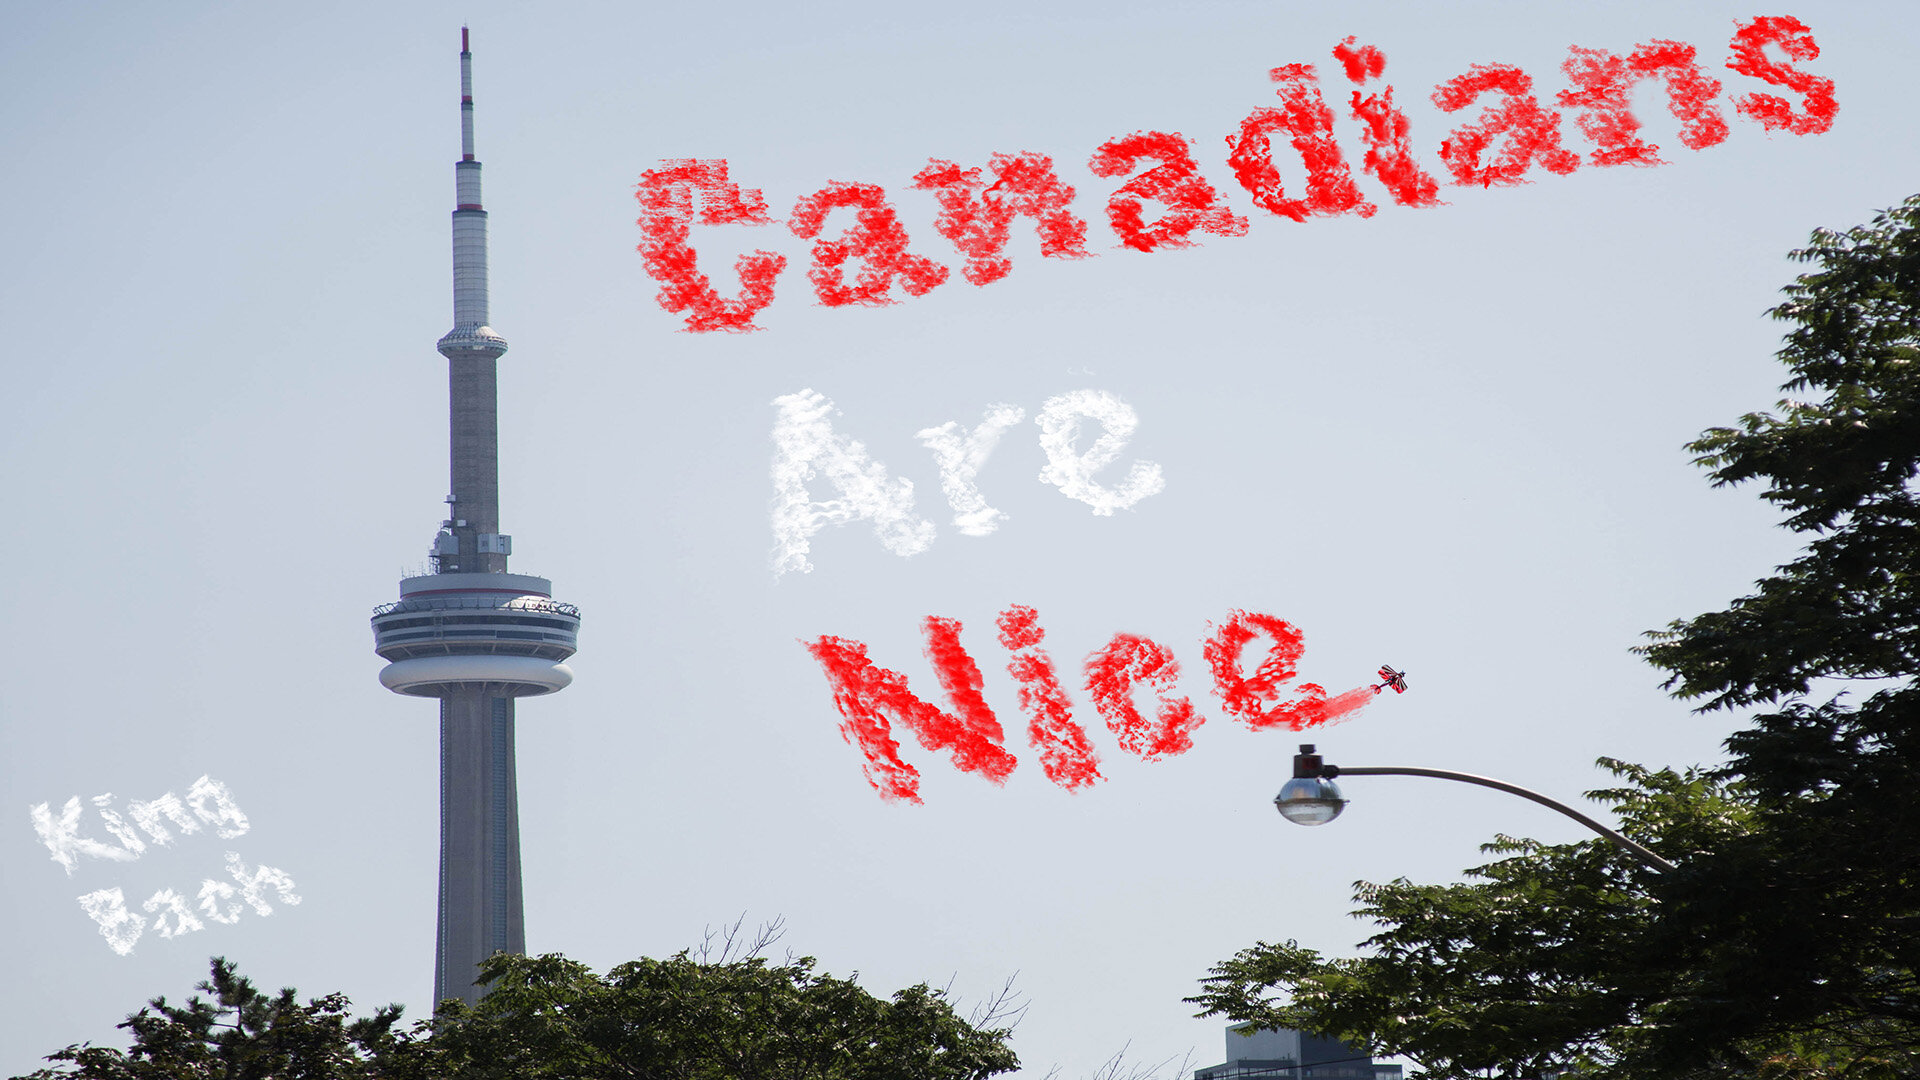 canadians are nice_1920.jpg